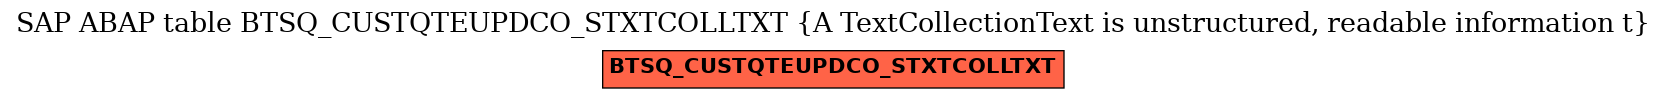 E-R Diagram for table BTSQ_CUSTQTEUPDCO_STXTCOLLTXT (A TextCollectionText is unstructured, readable information t)